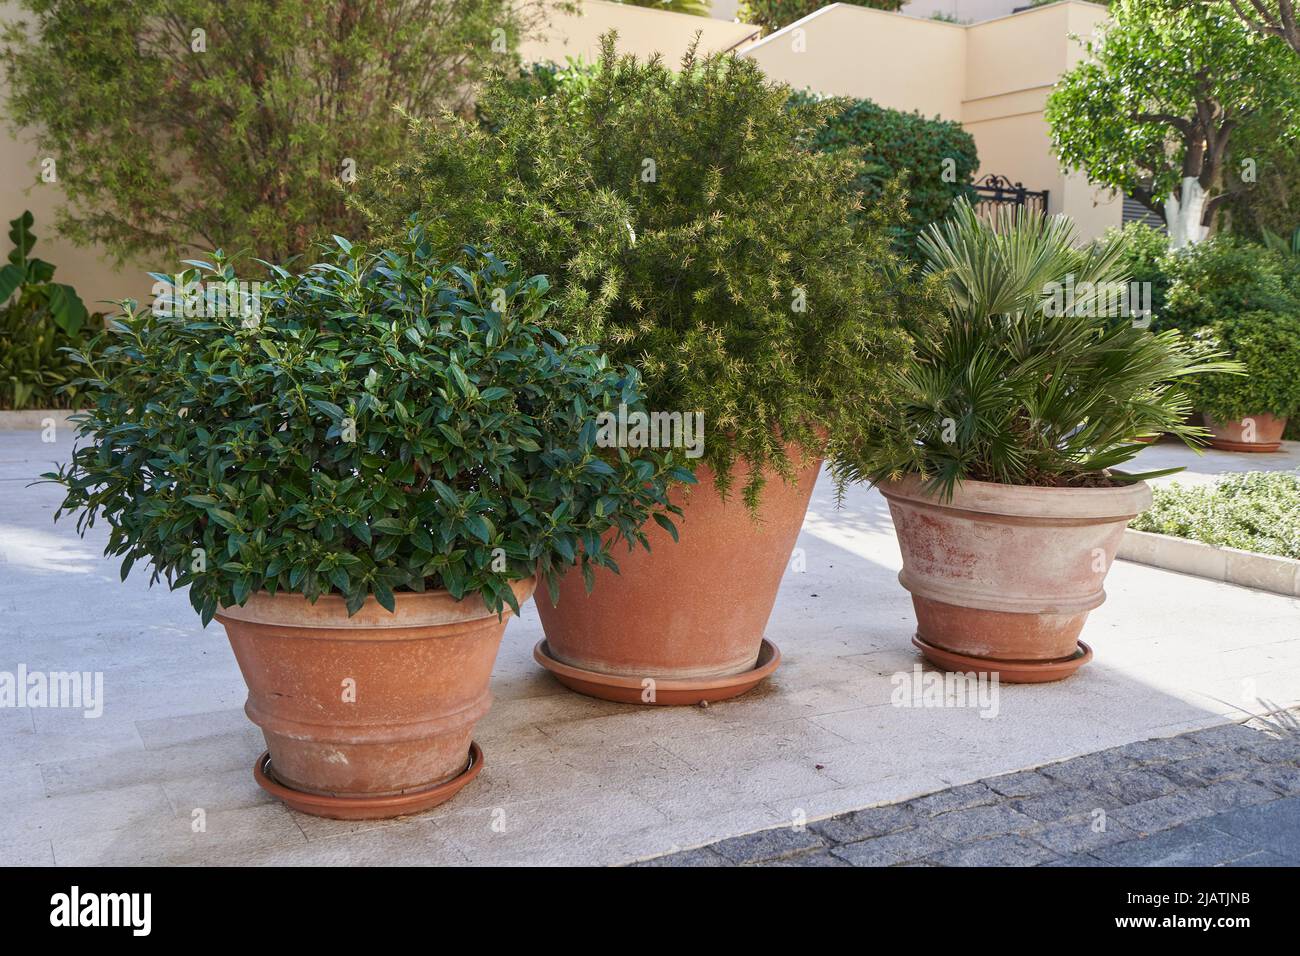 Bushes in a clay pots for landscaping garden Stock Photo